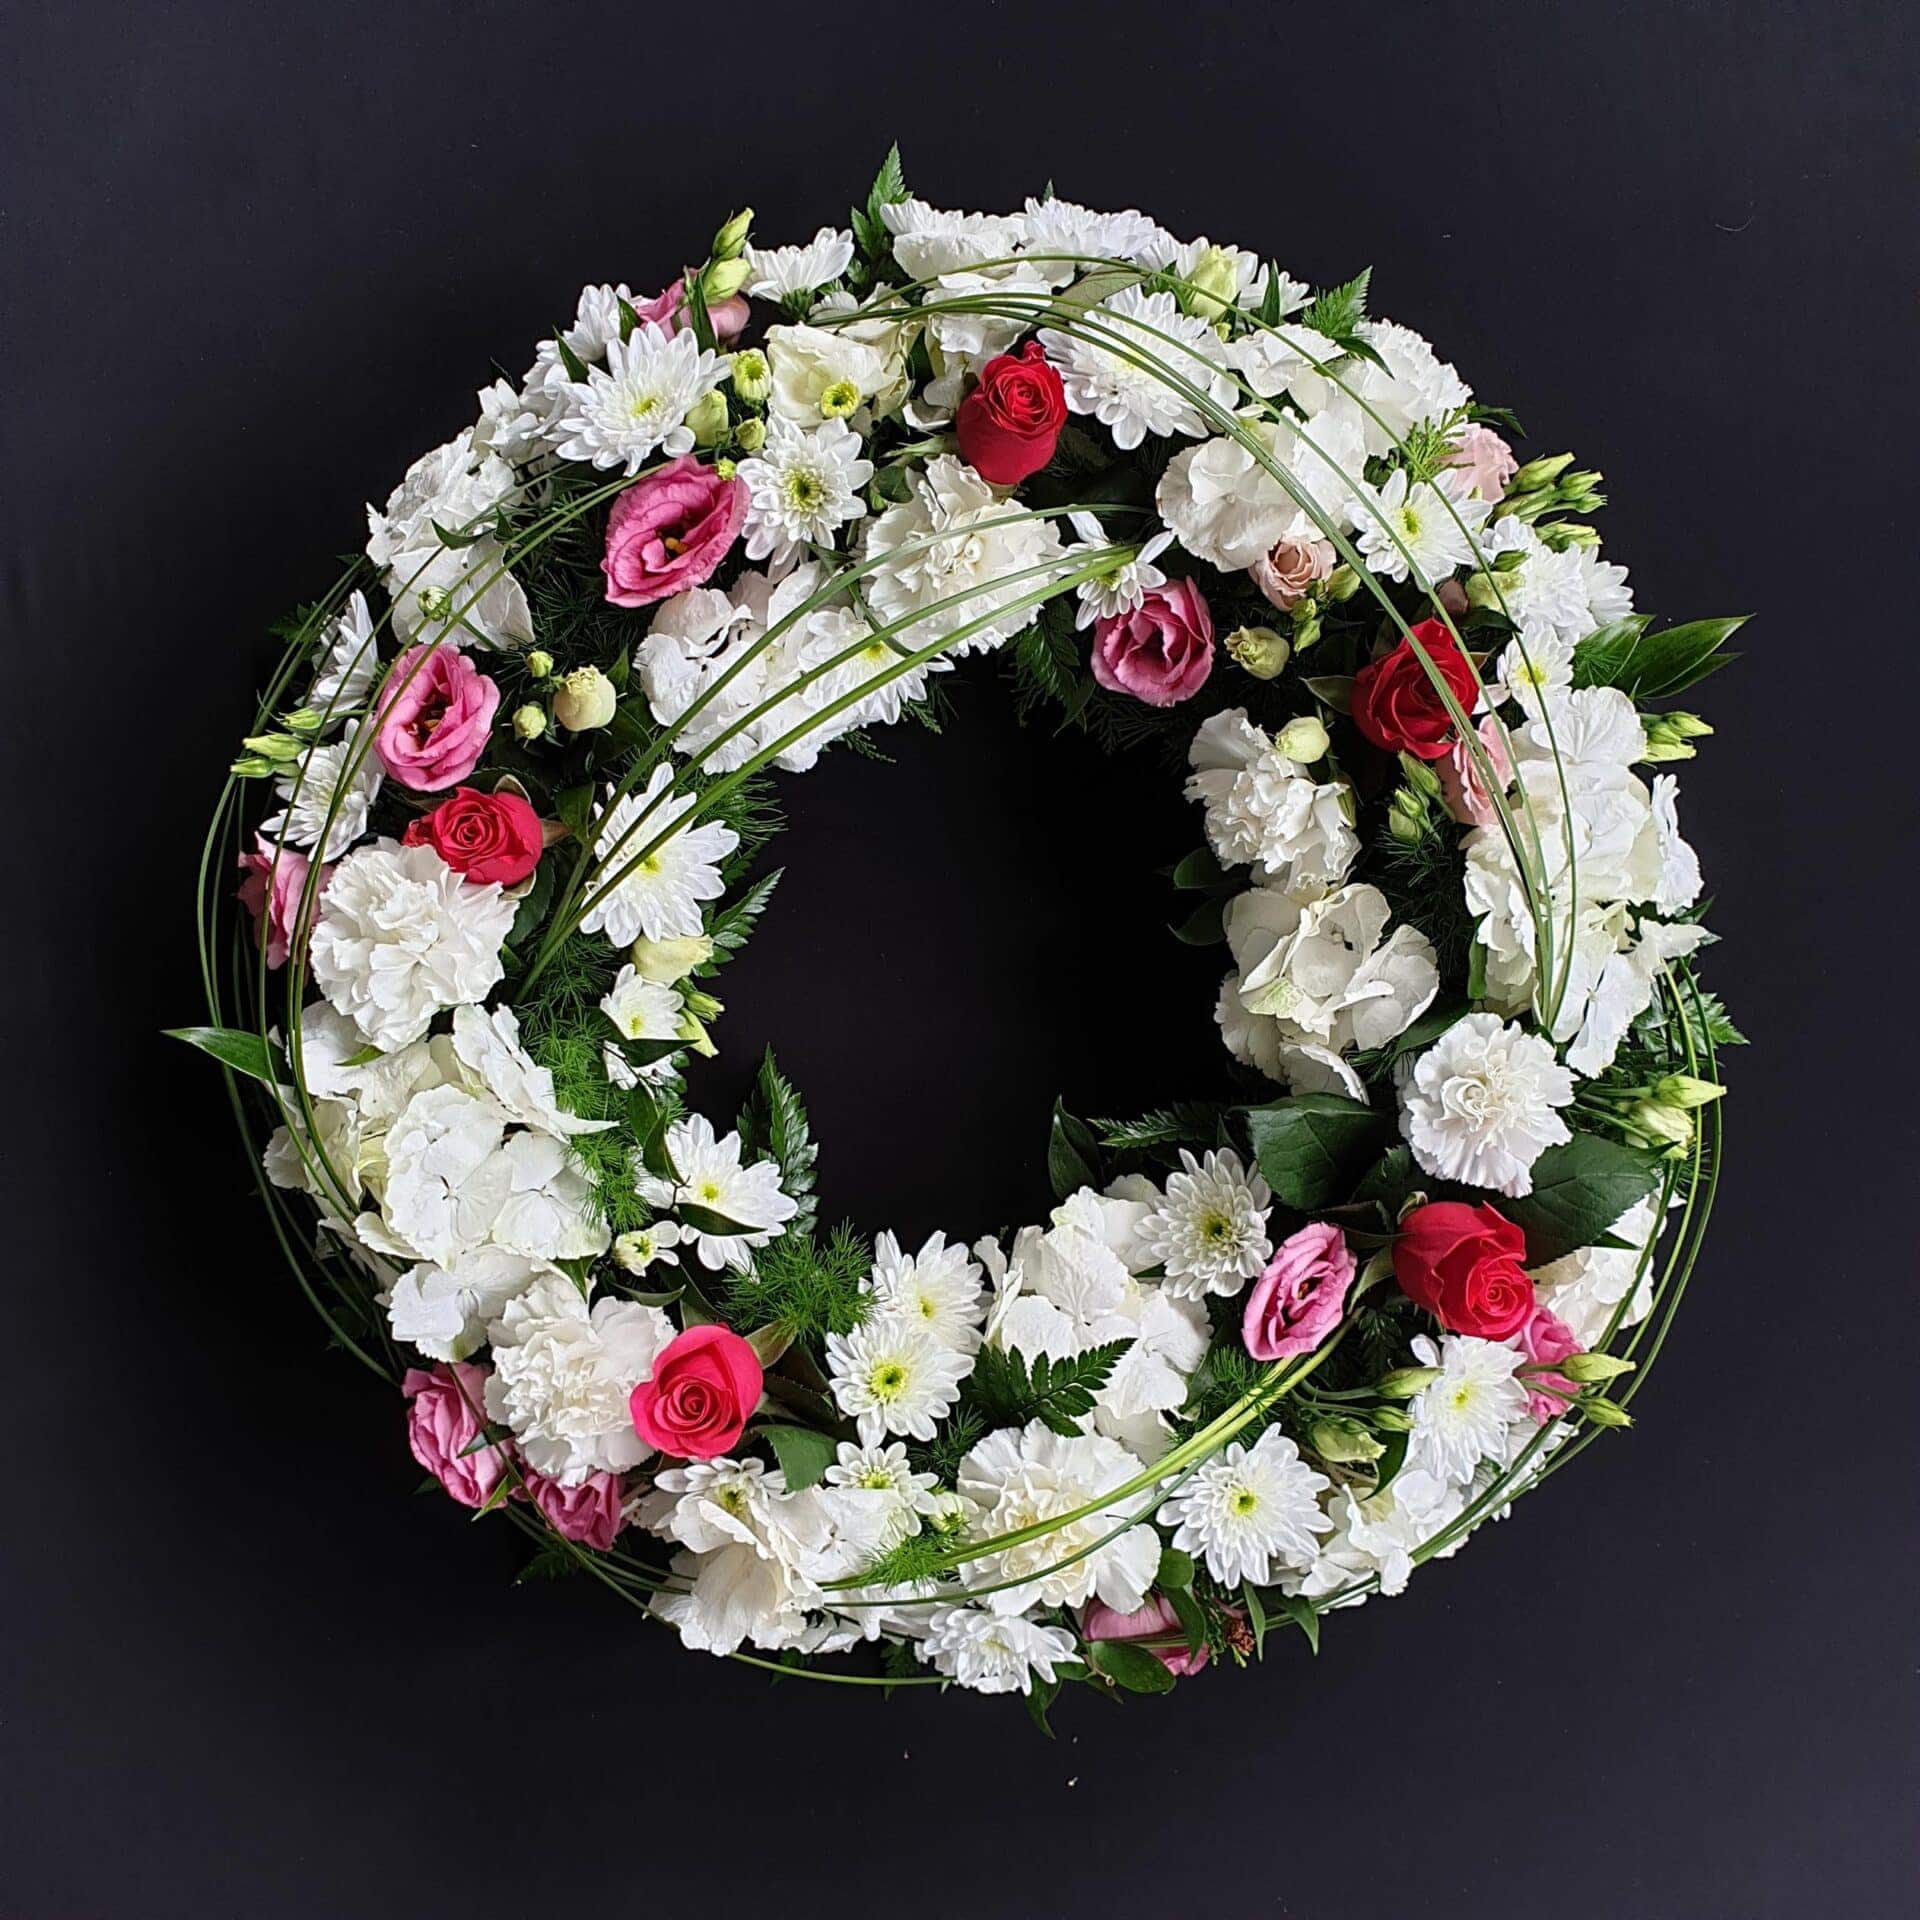 The Funeral Wreath, Wreath Funeral